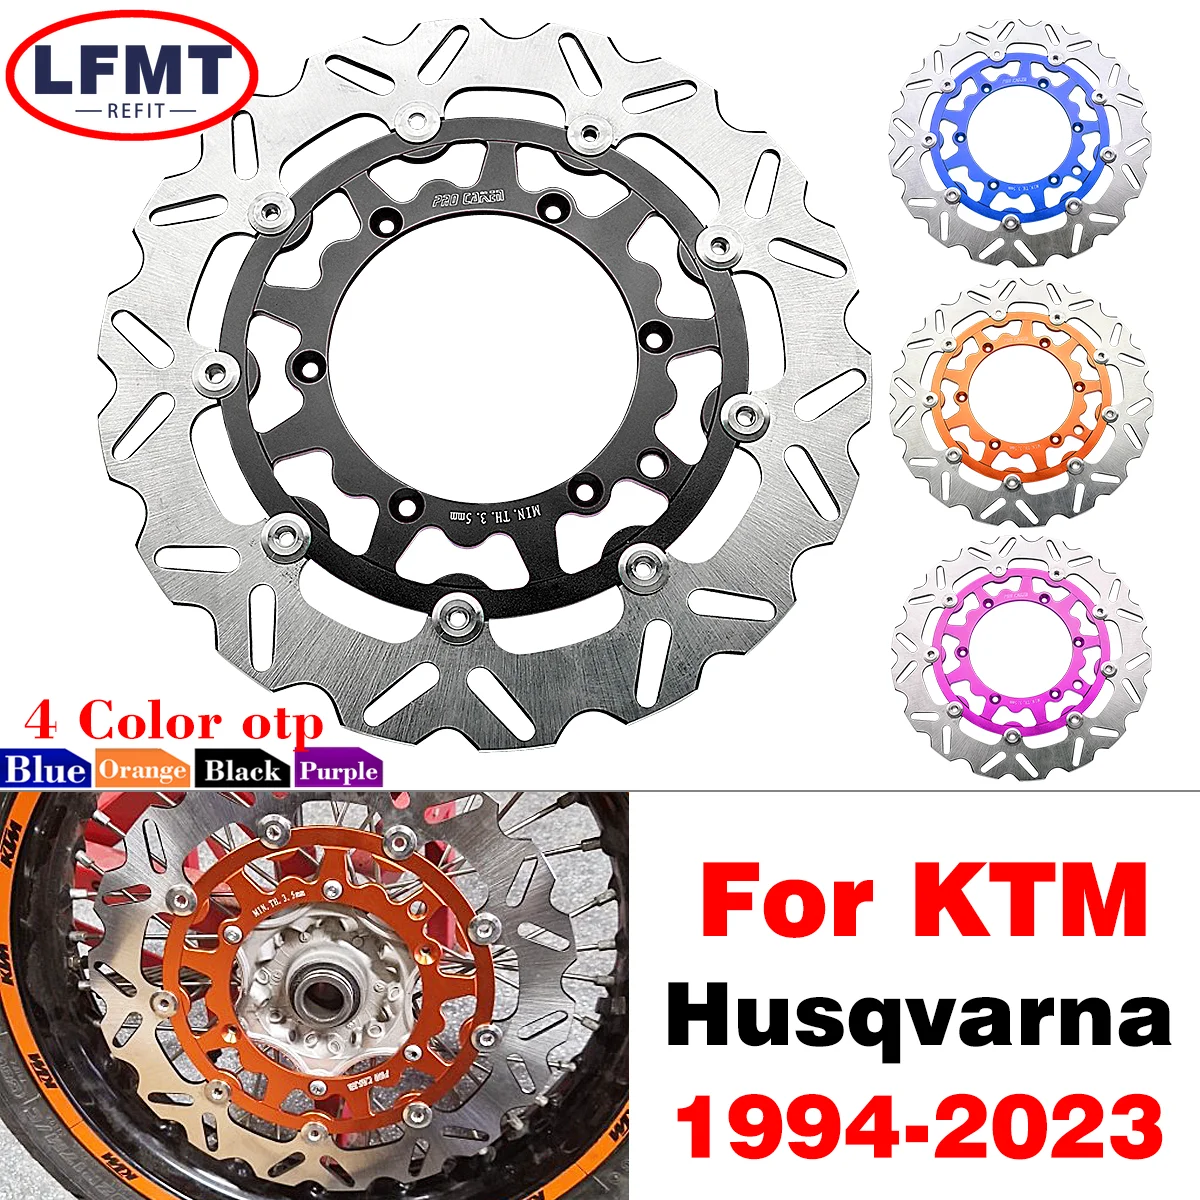 

For KTM XC XCF XCW SX SXF EXC EXCF 6Days 125 200 250 300 350 450 500 1994-2023 Motorcycle 320MM Front Floating Brake Disc Rotor